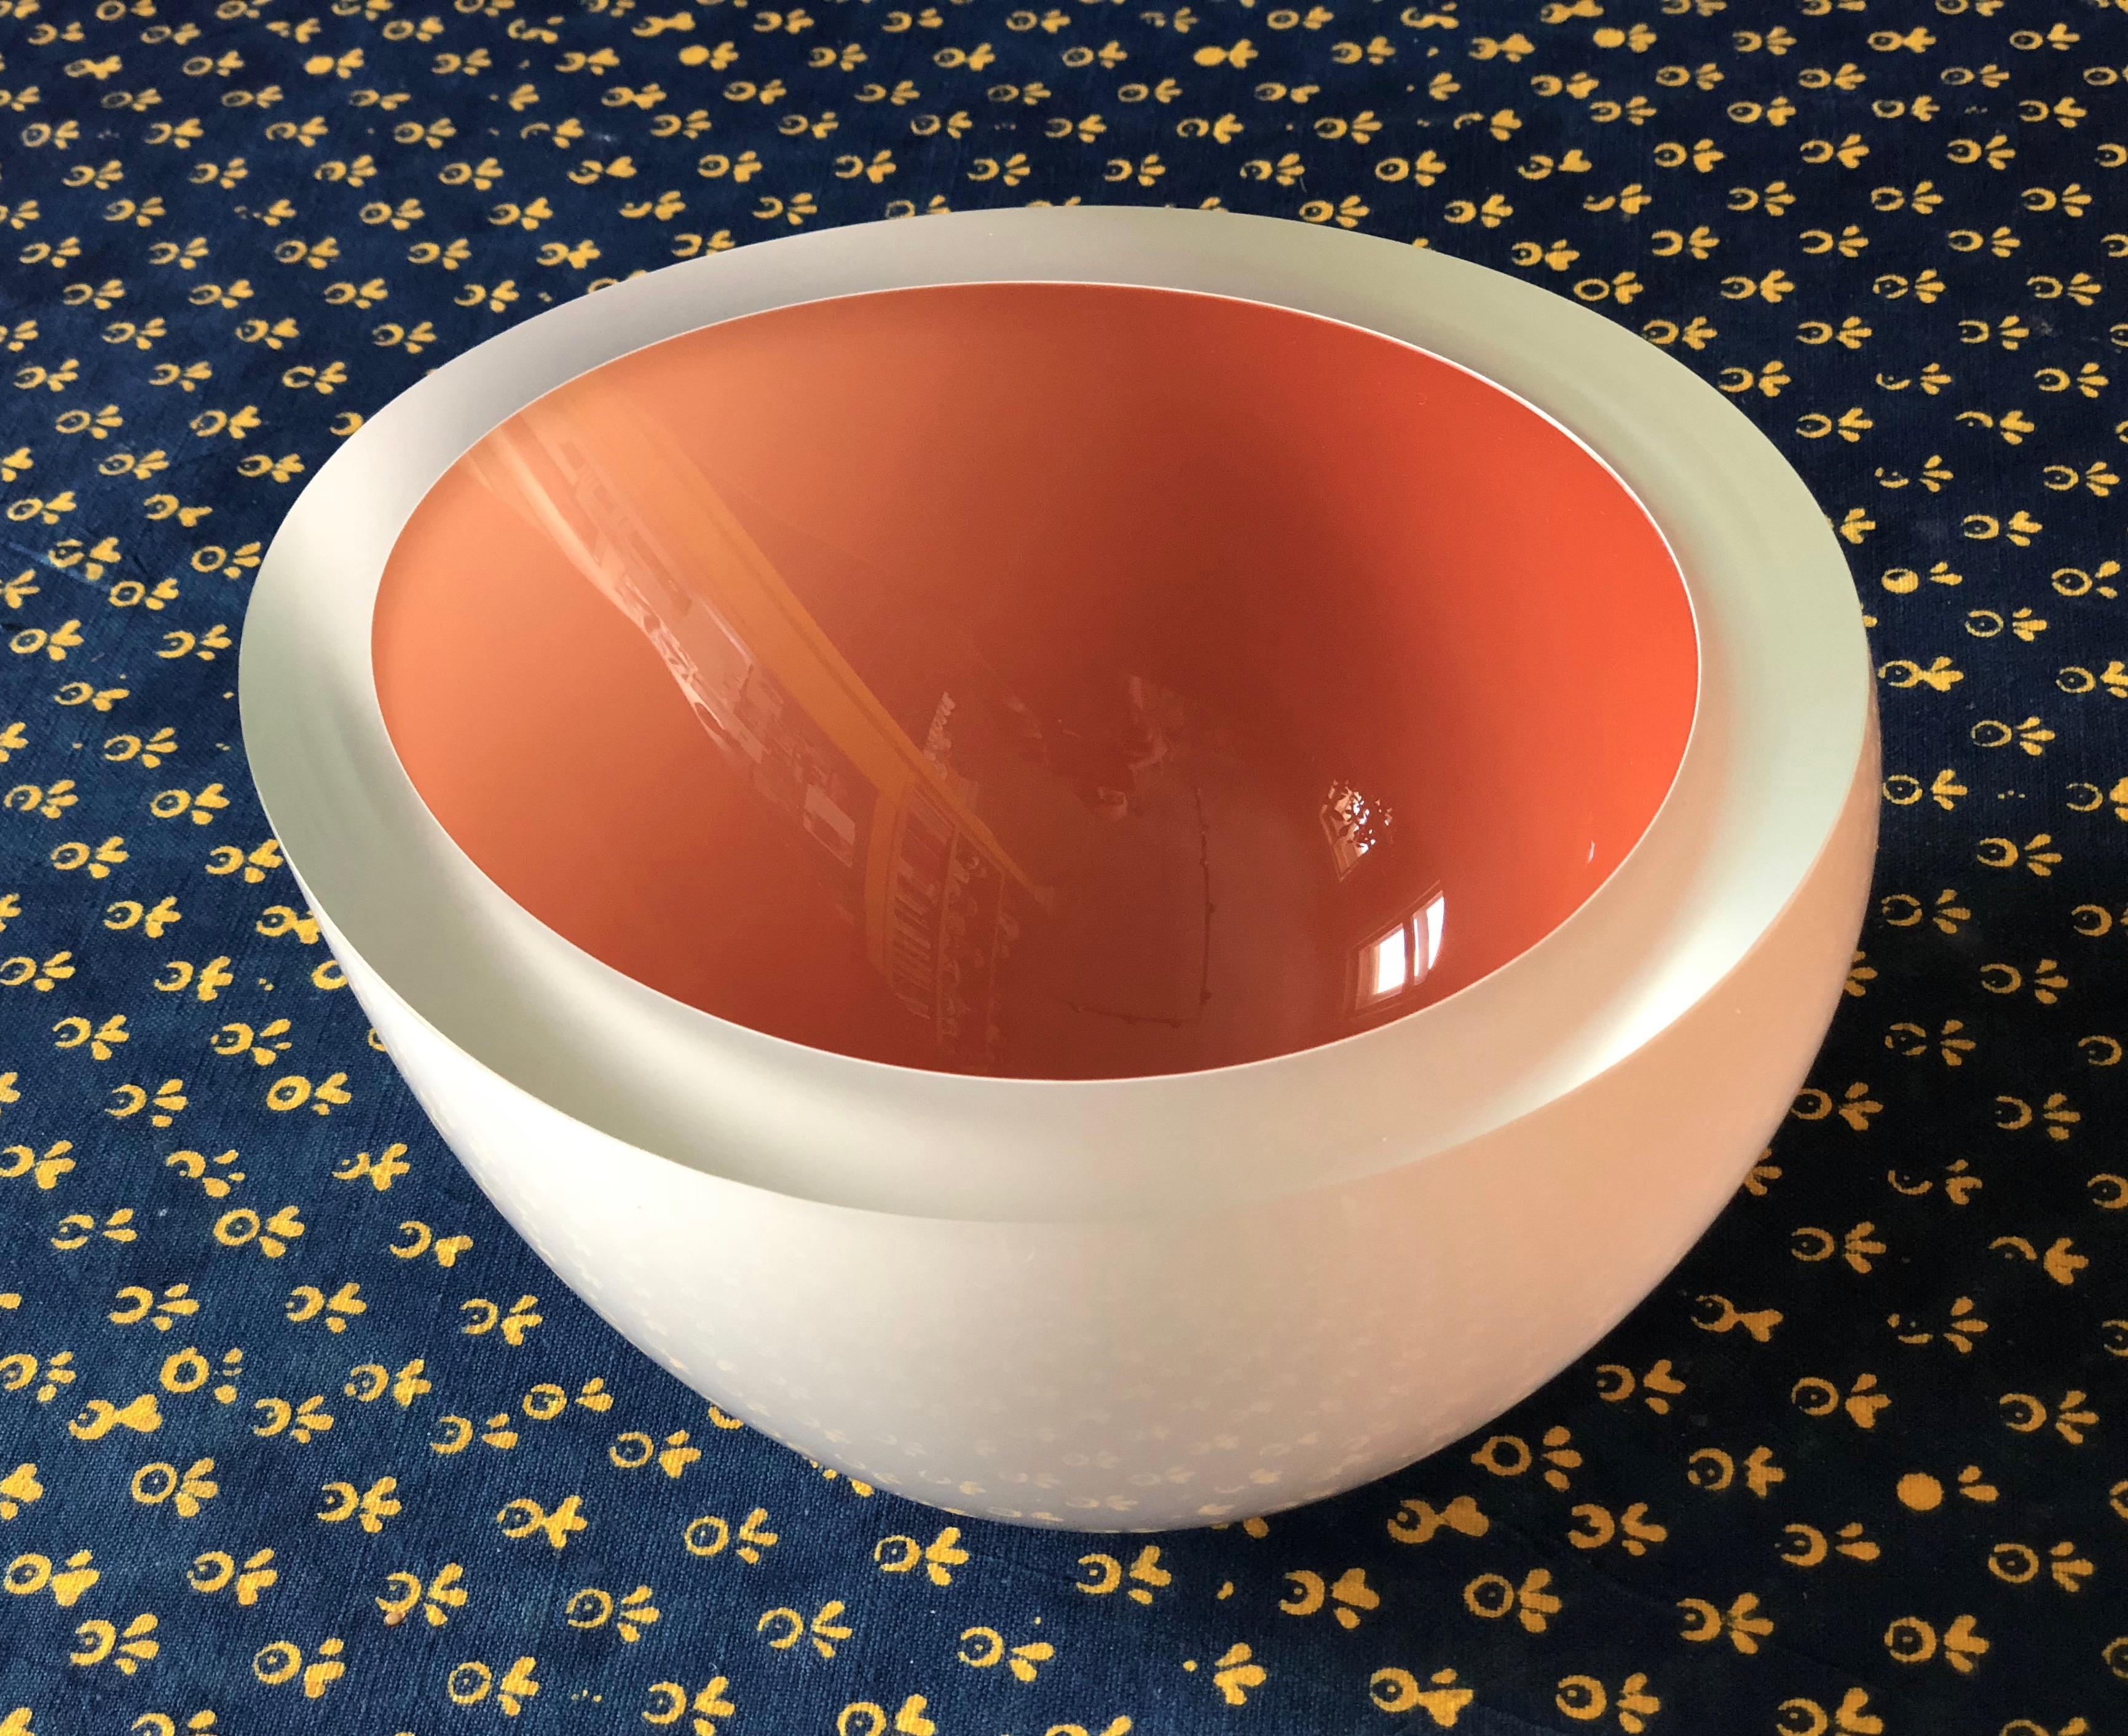 Contemporary Studio Glass Bowl in Coral Color, Made in the Czech Republic, 2010 For Sale 2